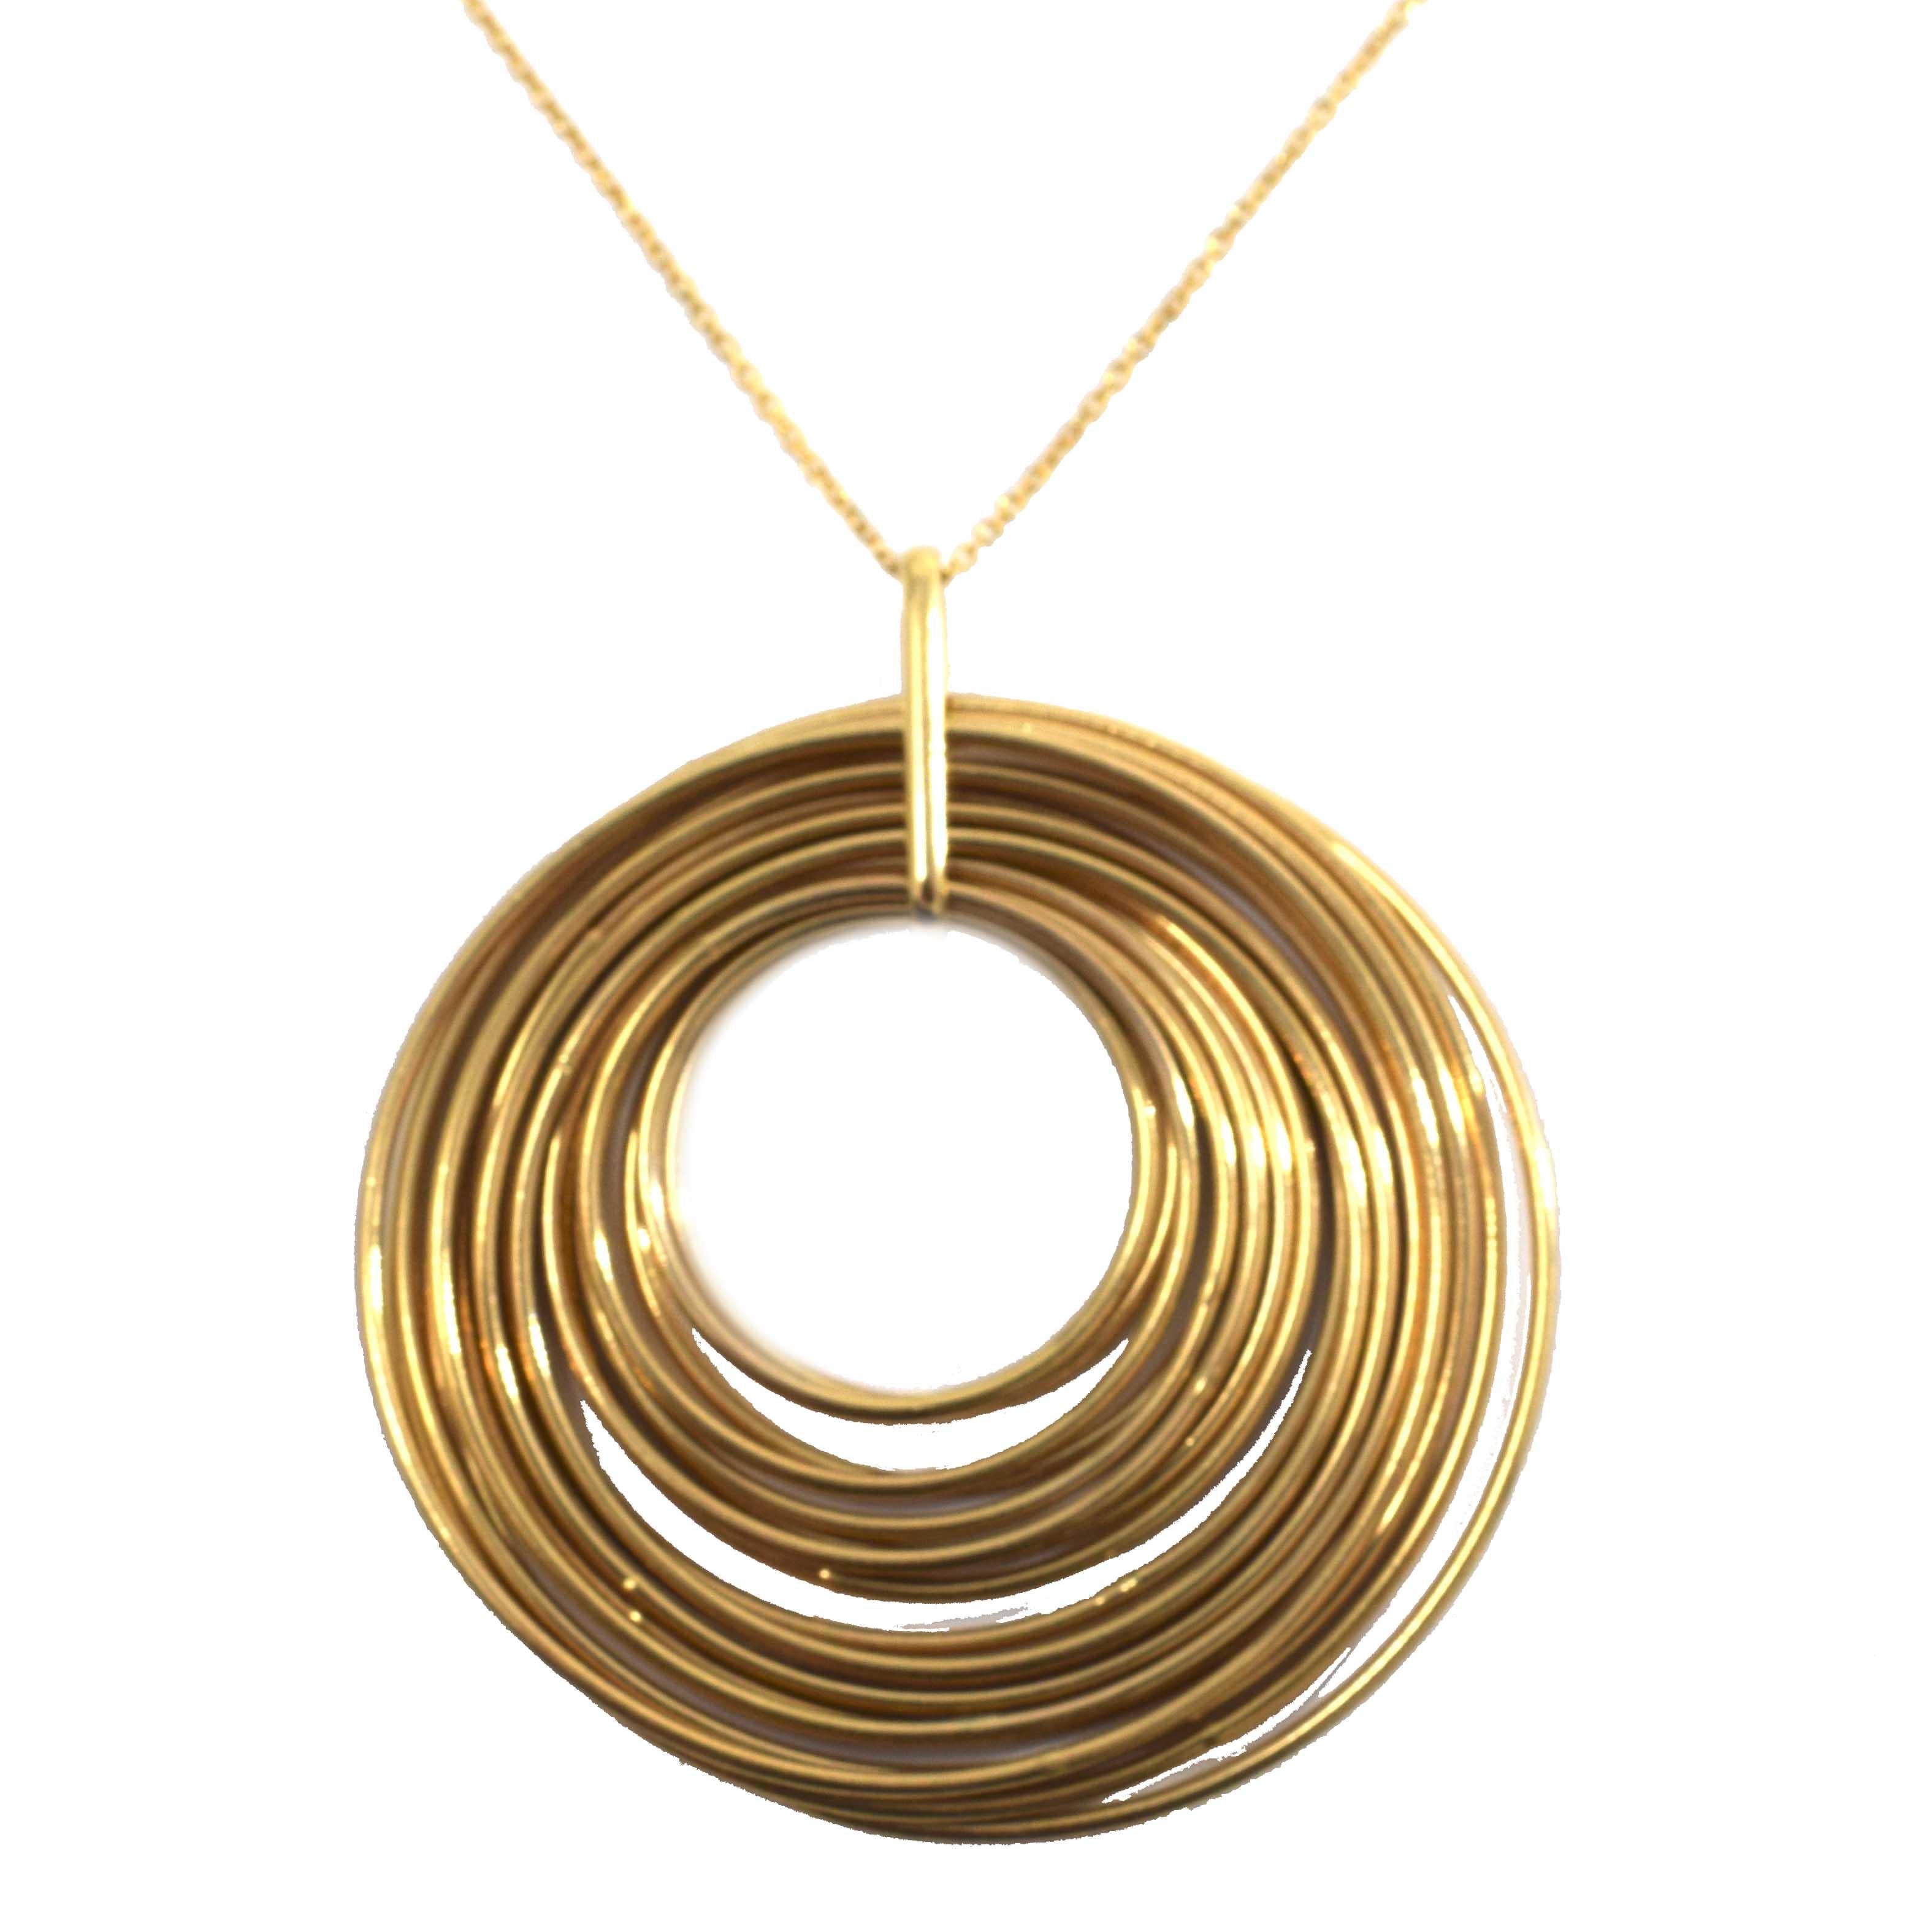 Brilliance Jewels, Miami
Questions? Call Us Anytime!
786,482,8100

Style: Overlapping Multi-Layered Circle                                  Necklace

Metal: Yellow Gold

Metal Purity: 18k​​​​​​​

Total Item Weight (grams): 8.55

Necklace Length: